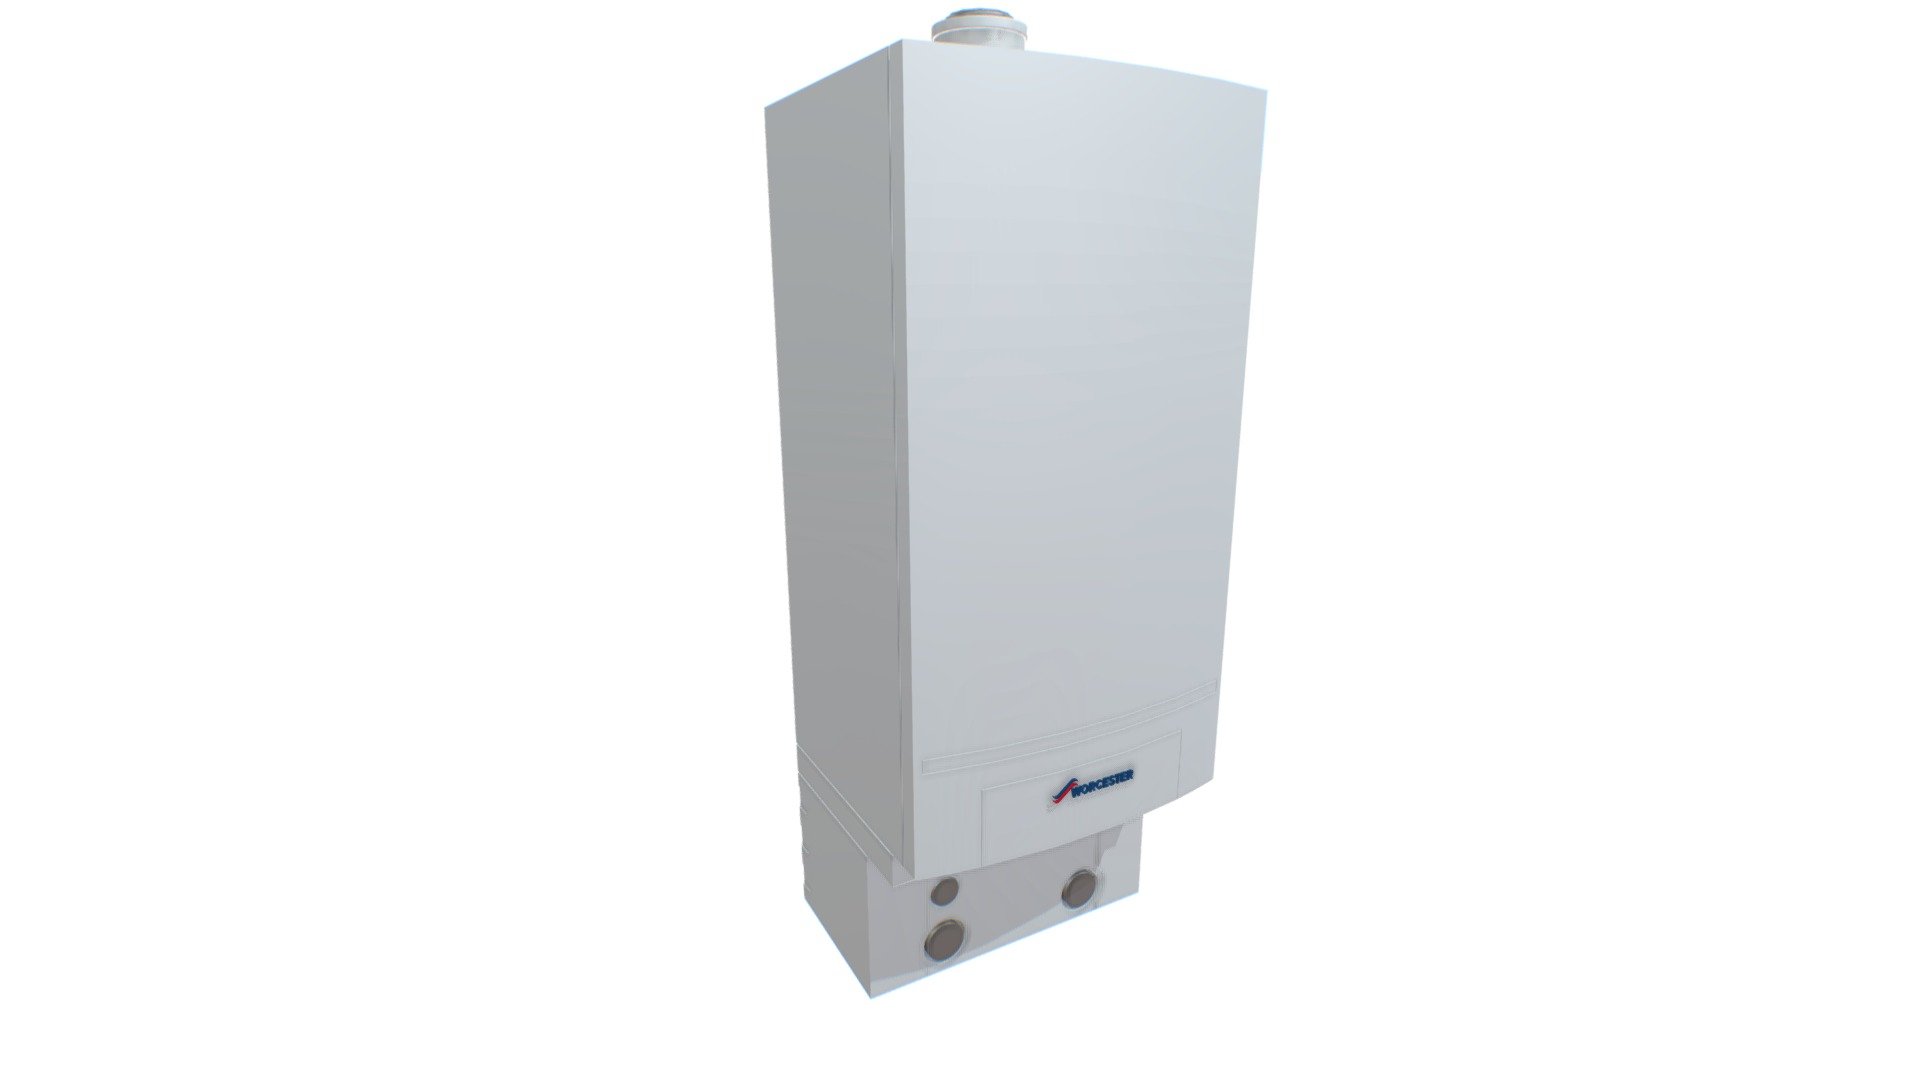 he Worcester GB162 is part of a market leading range of energy-saving condensing wall mounted gas-fired boilers.

The GB162 is an extremely versatile and compact wall hung condensing boiler that can be installed on its own or as part of a multi-boiler ‘cascade’ system. The boiler is available with individual outputs of 45, 65, 80 and 100kW and outputs of up to 800kW can be achieved when multiple units are connected as part of a cascade installation 3d model